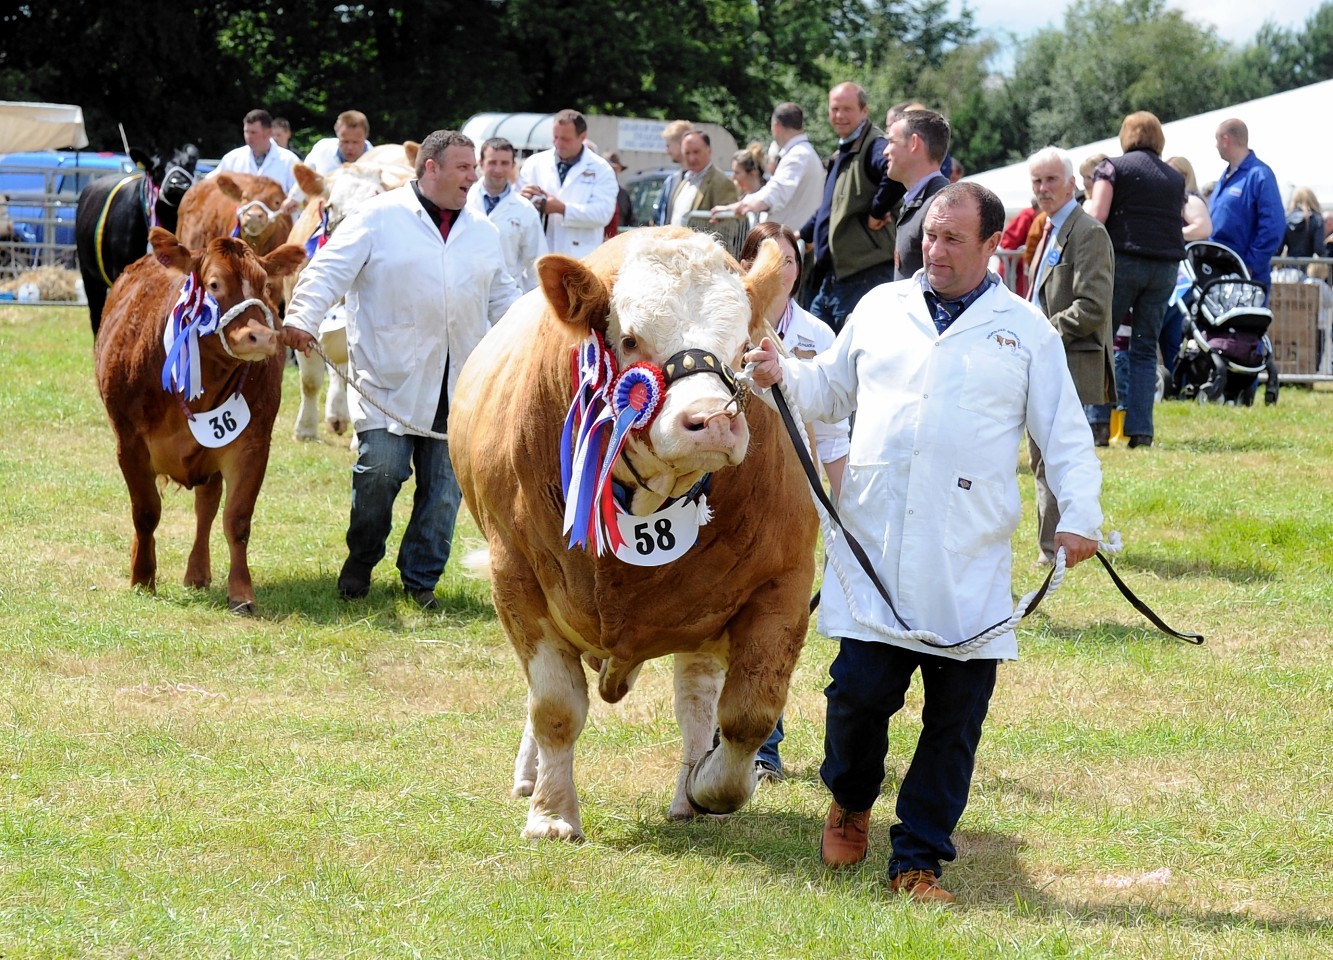 Cattle judging at the Fettercairn Show